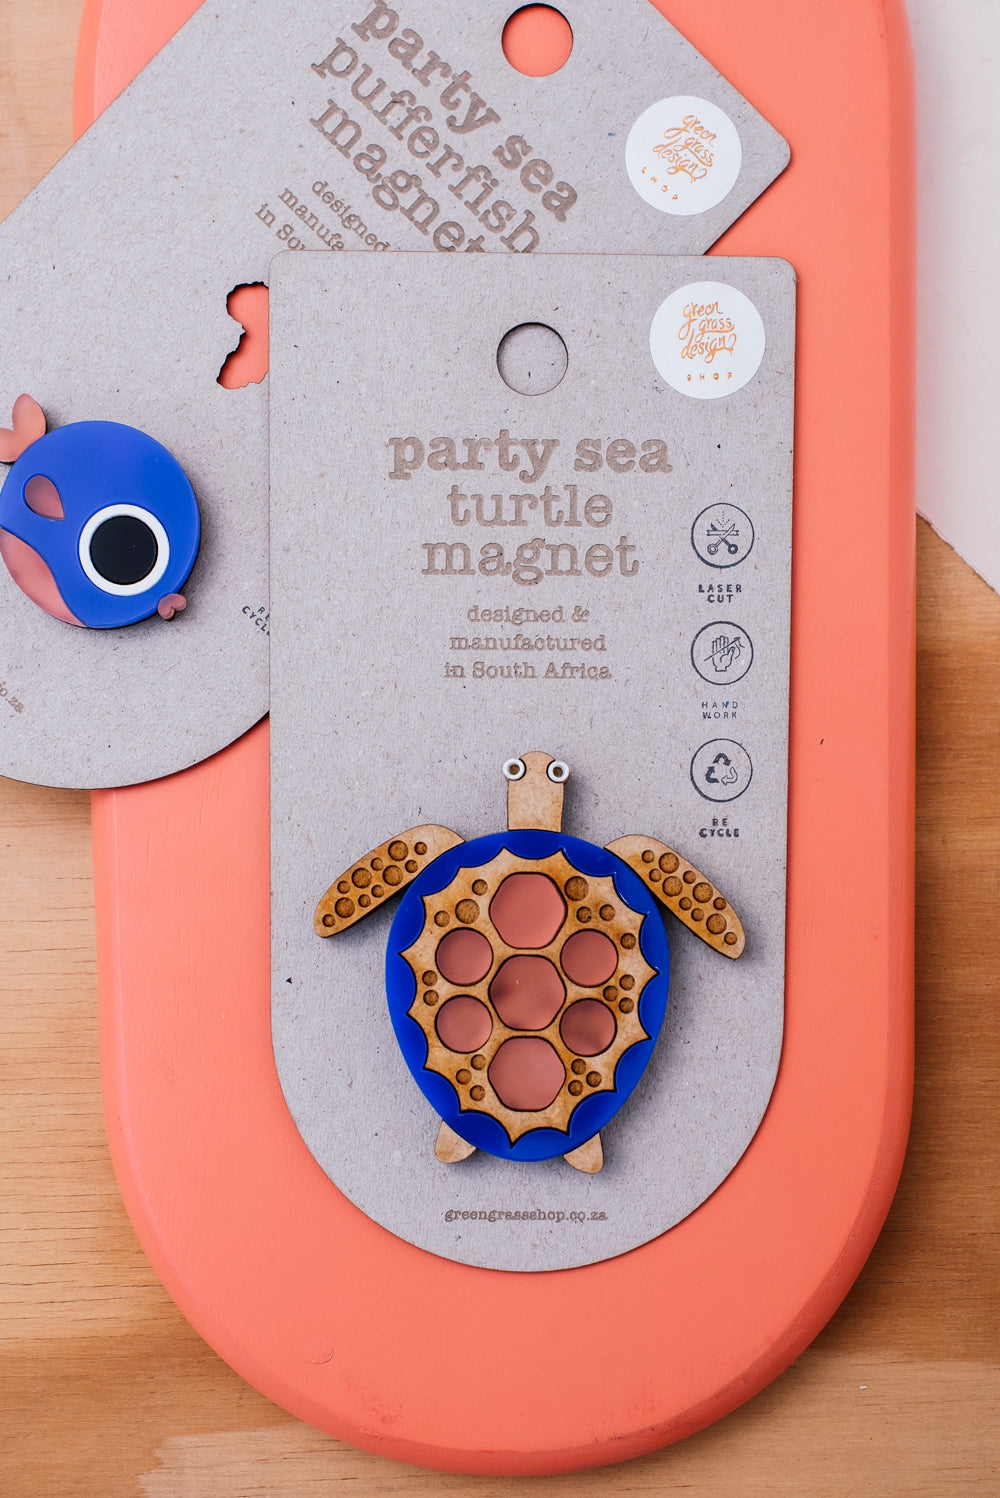 party fish magnets set of 5